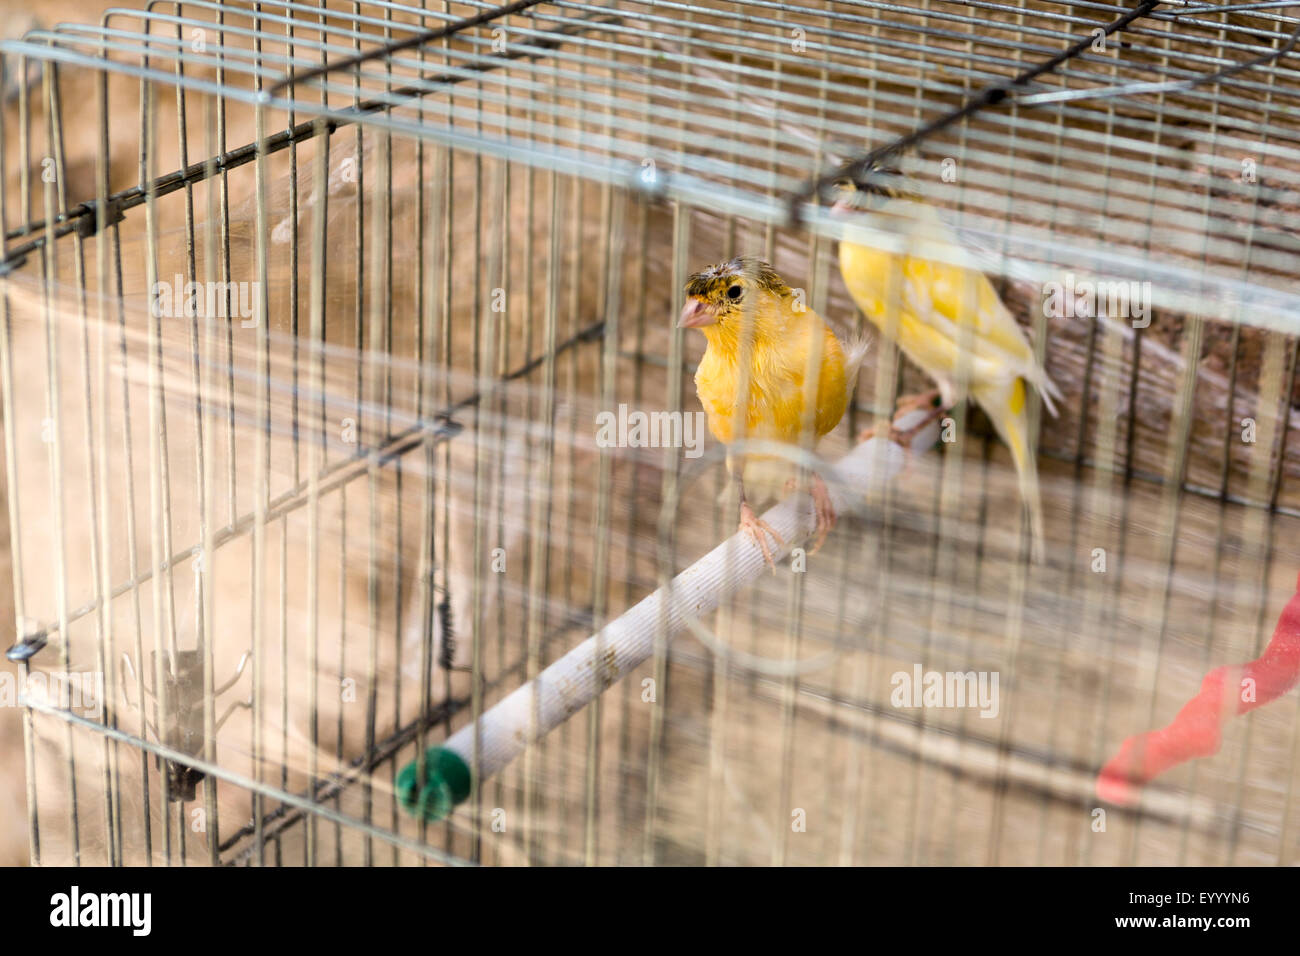 Canaries in cage. Old fort. Aqaba Jordan Stock Photo: 86051650 - Alamy